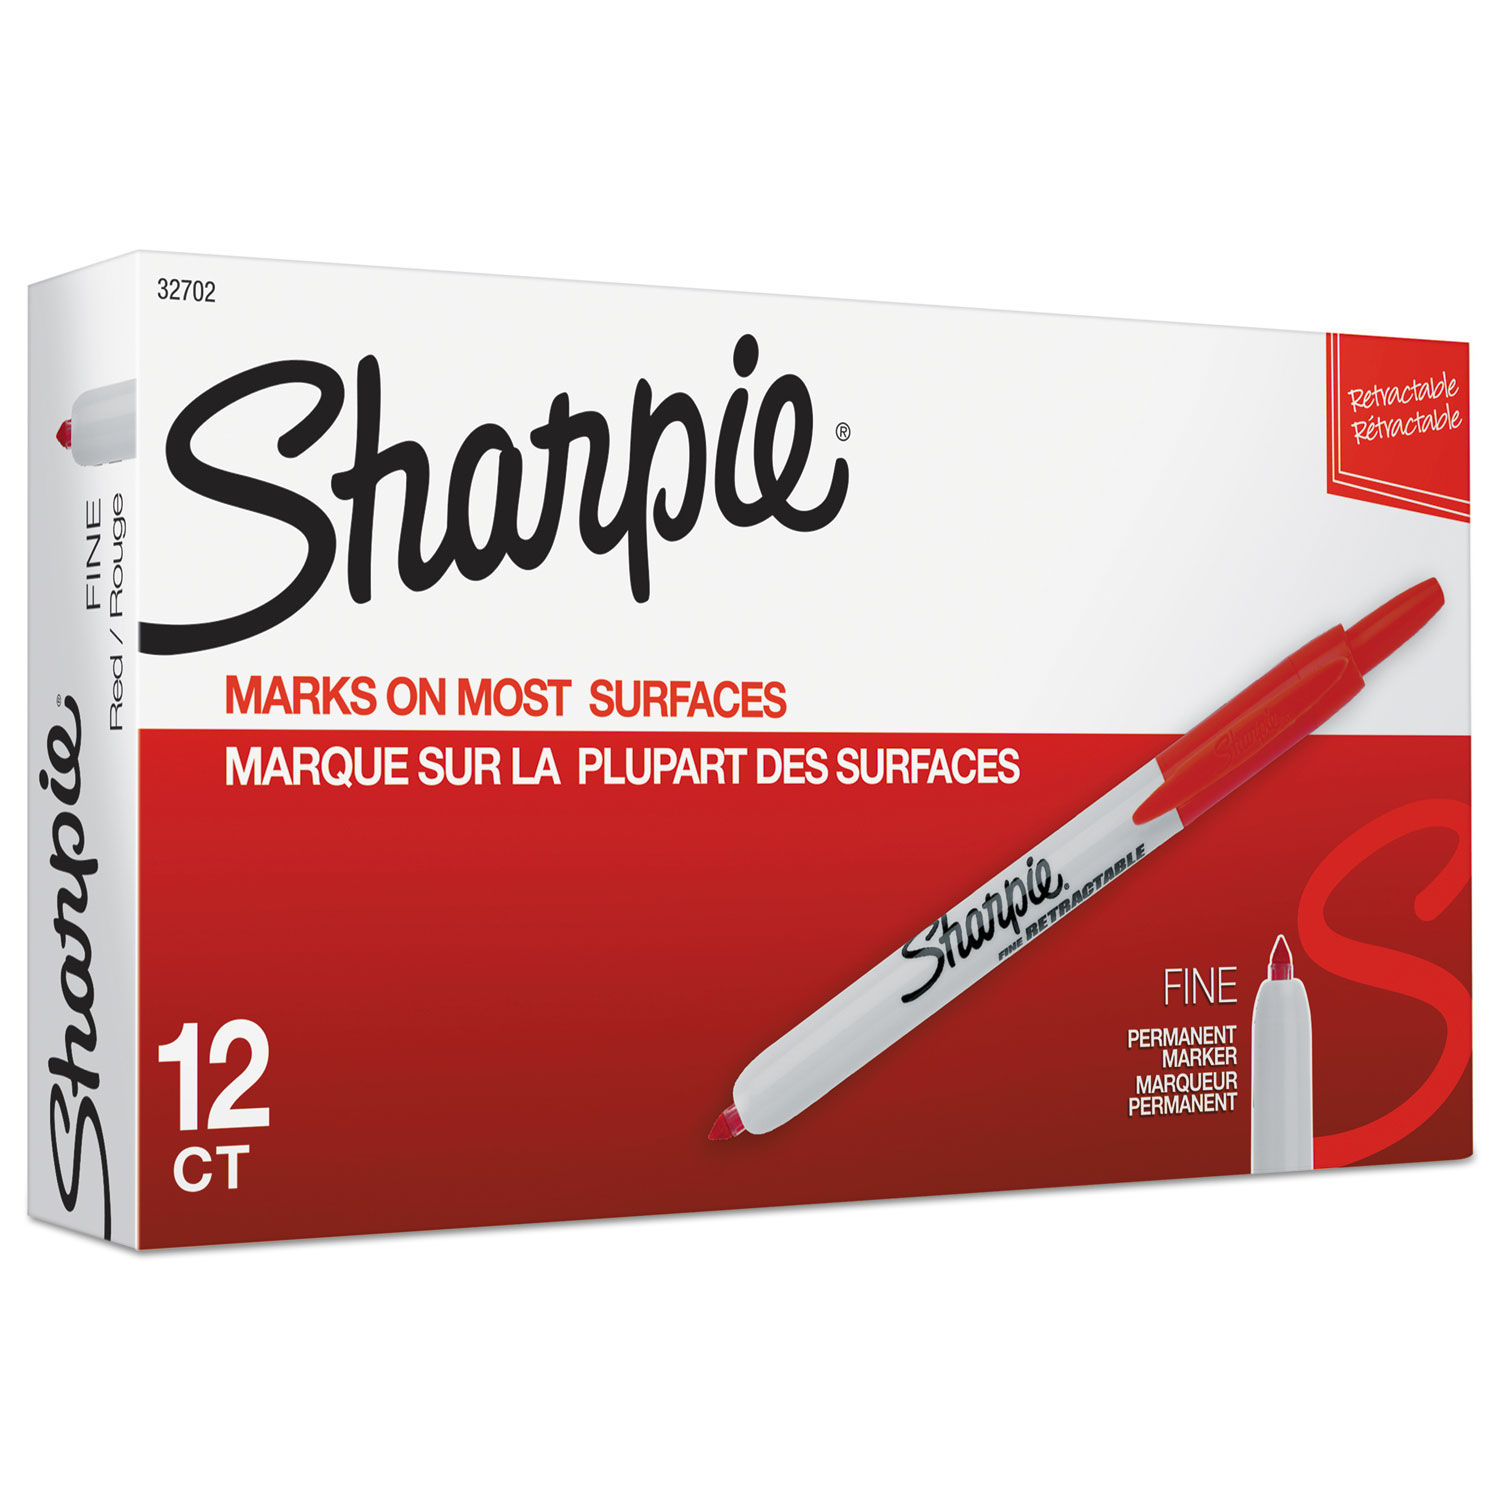 Sharpie® Retractable Permanent Marker - Red, 12 markers